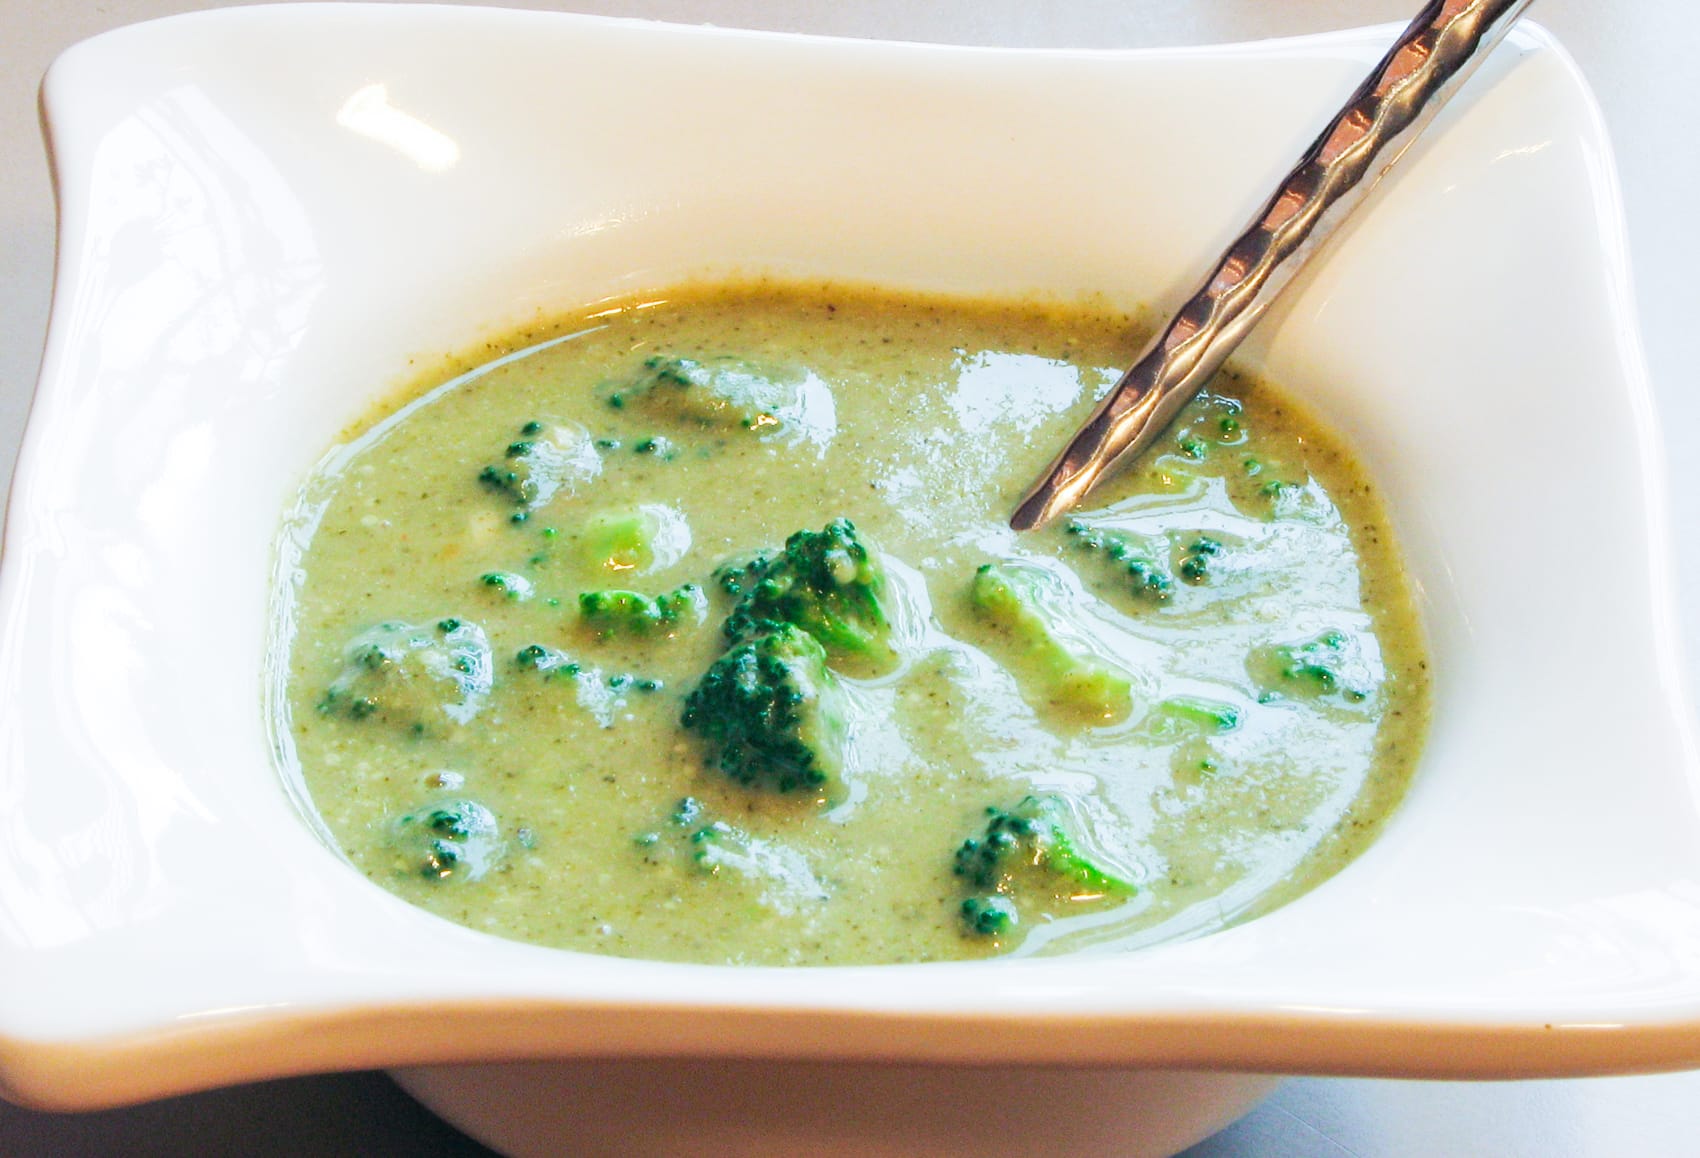 Cream of Broccoli and Parmesan Soup